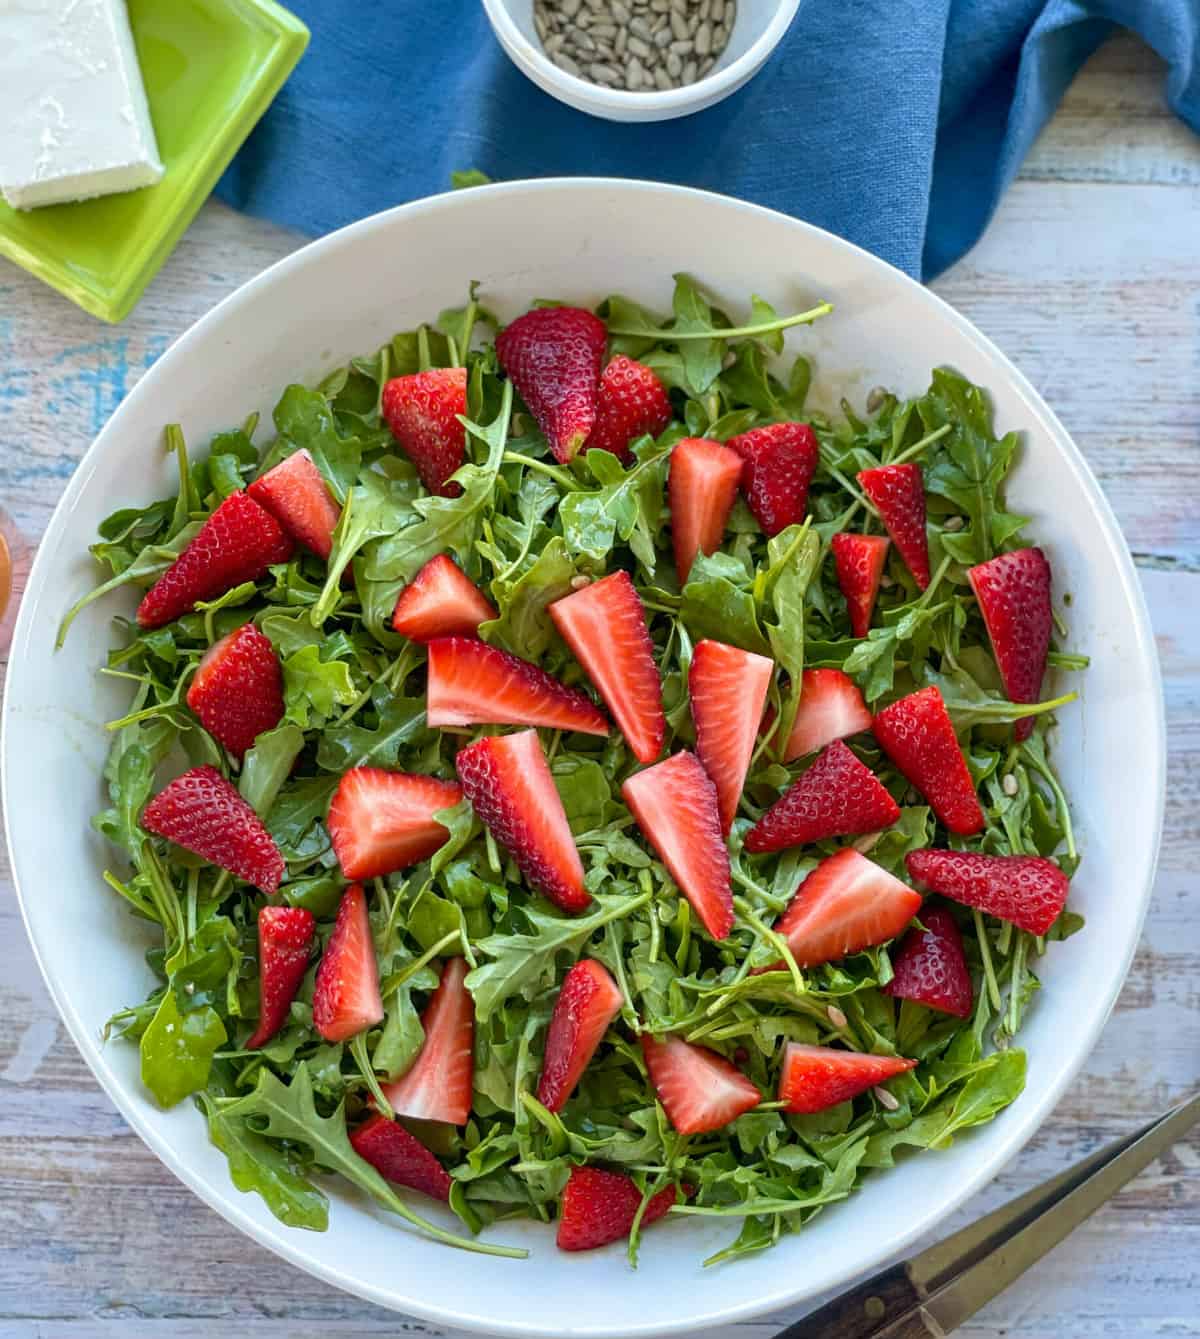 Strawberries placed over salad greens in a white bowl